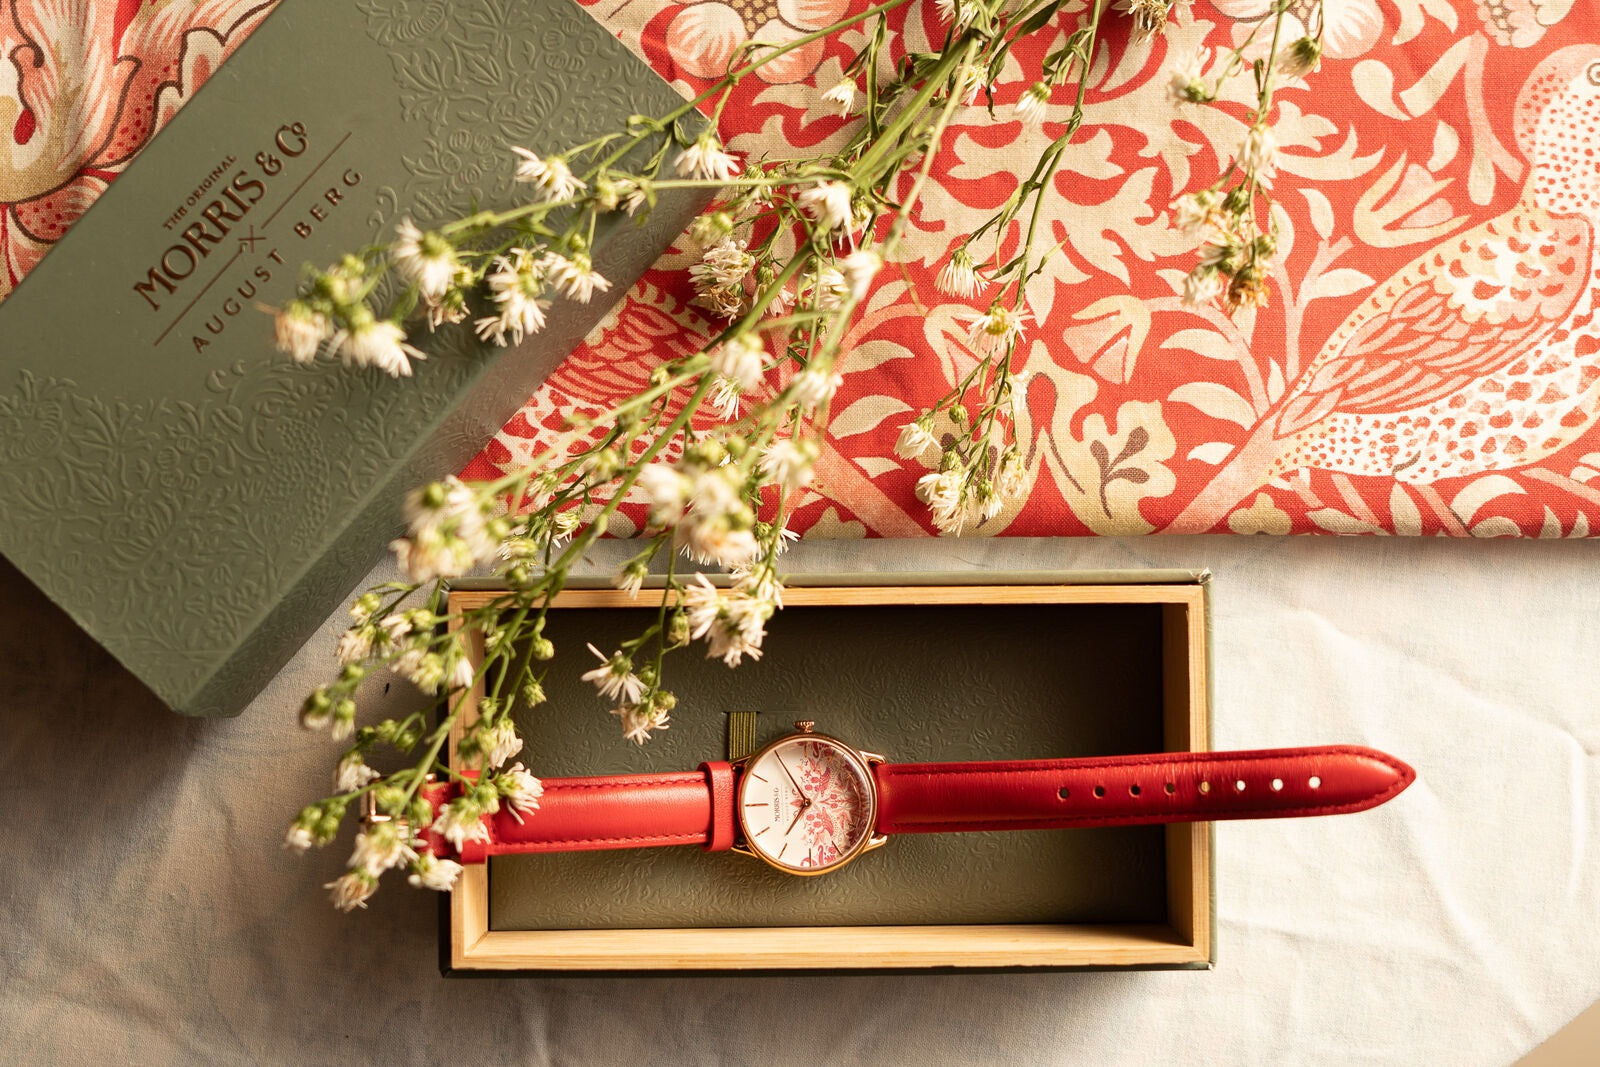 Celebrate Mom with Timeless Elegance: Gifts That Last a Lifetime